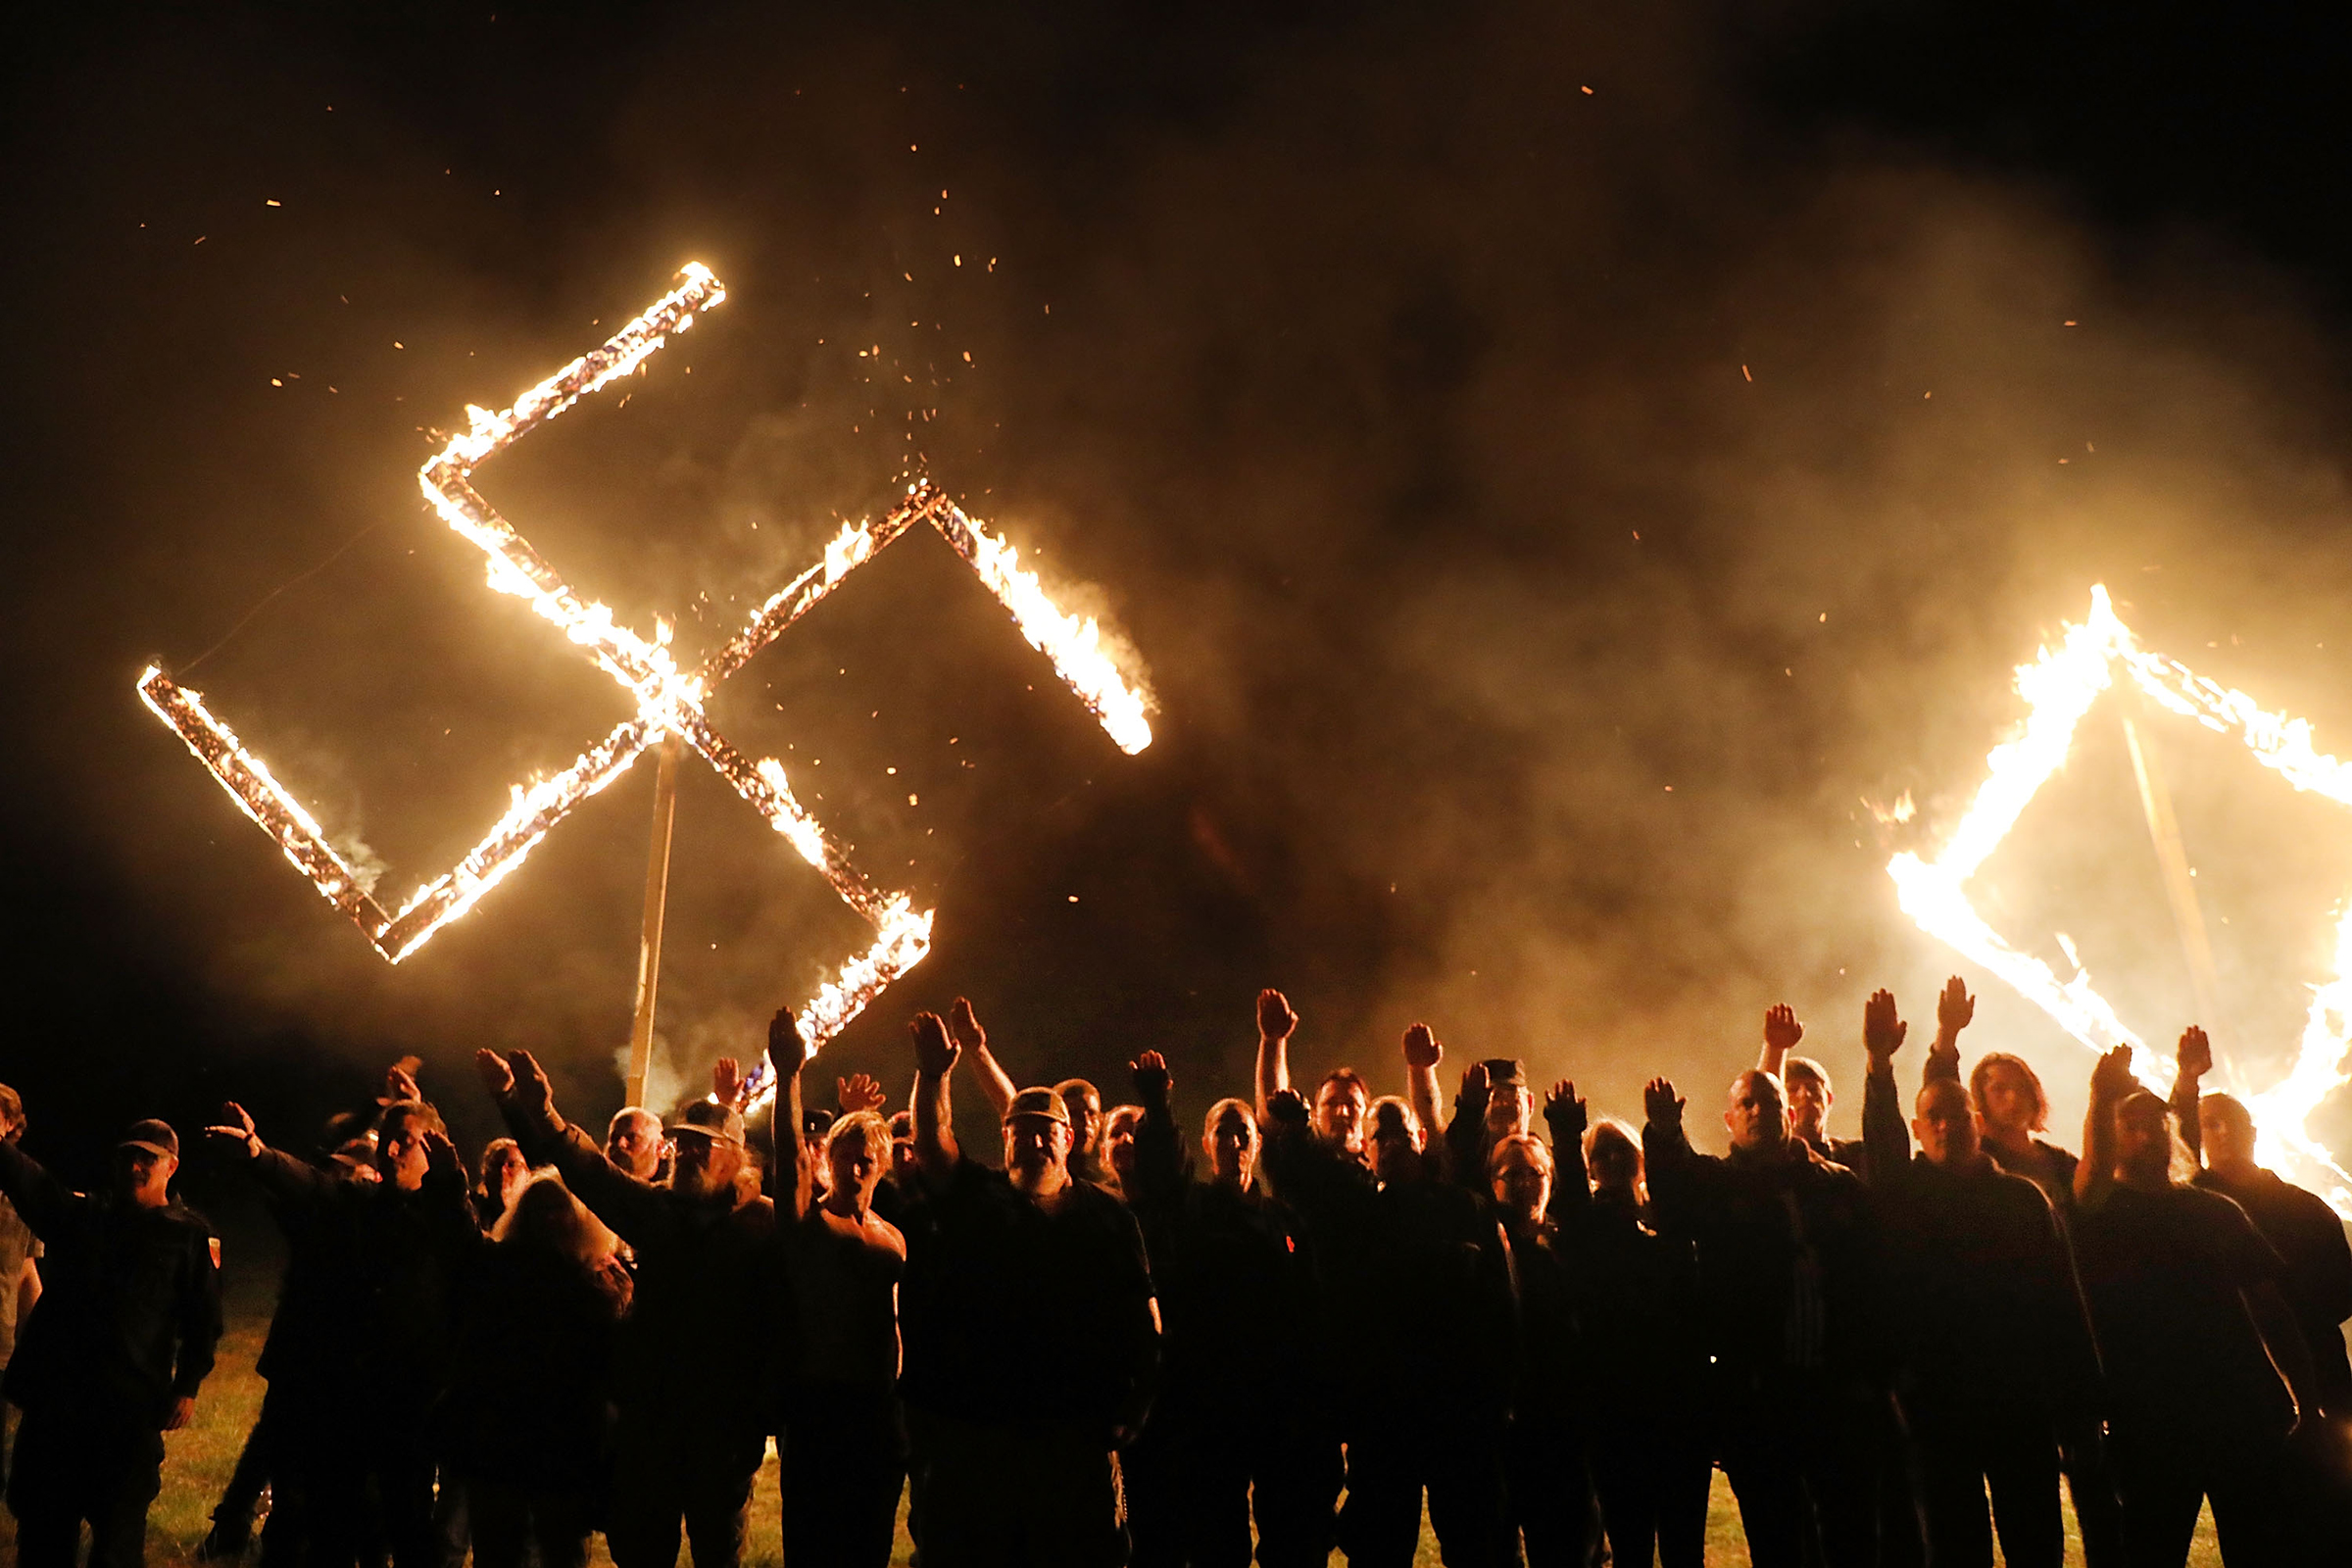 Members  of the National Socialist Movement, one of the largest neo-Nazi groups in the US, hold a swastika burning on April 21, 2018 in Draketown, Georgia. (Spencer Platt—Getty Images)